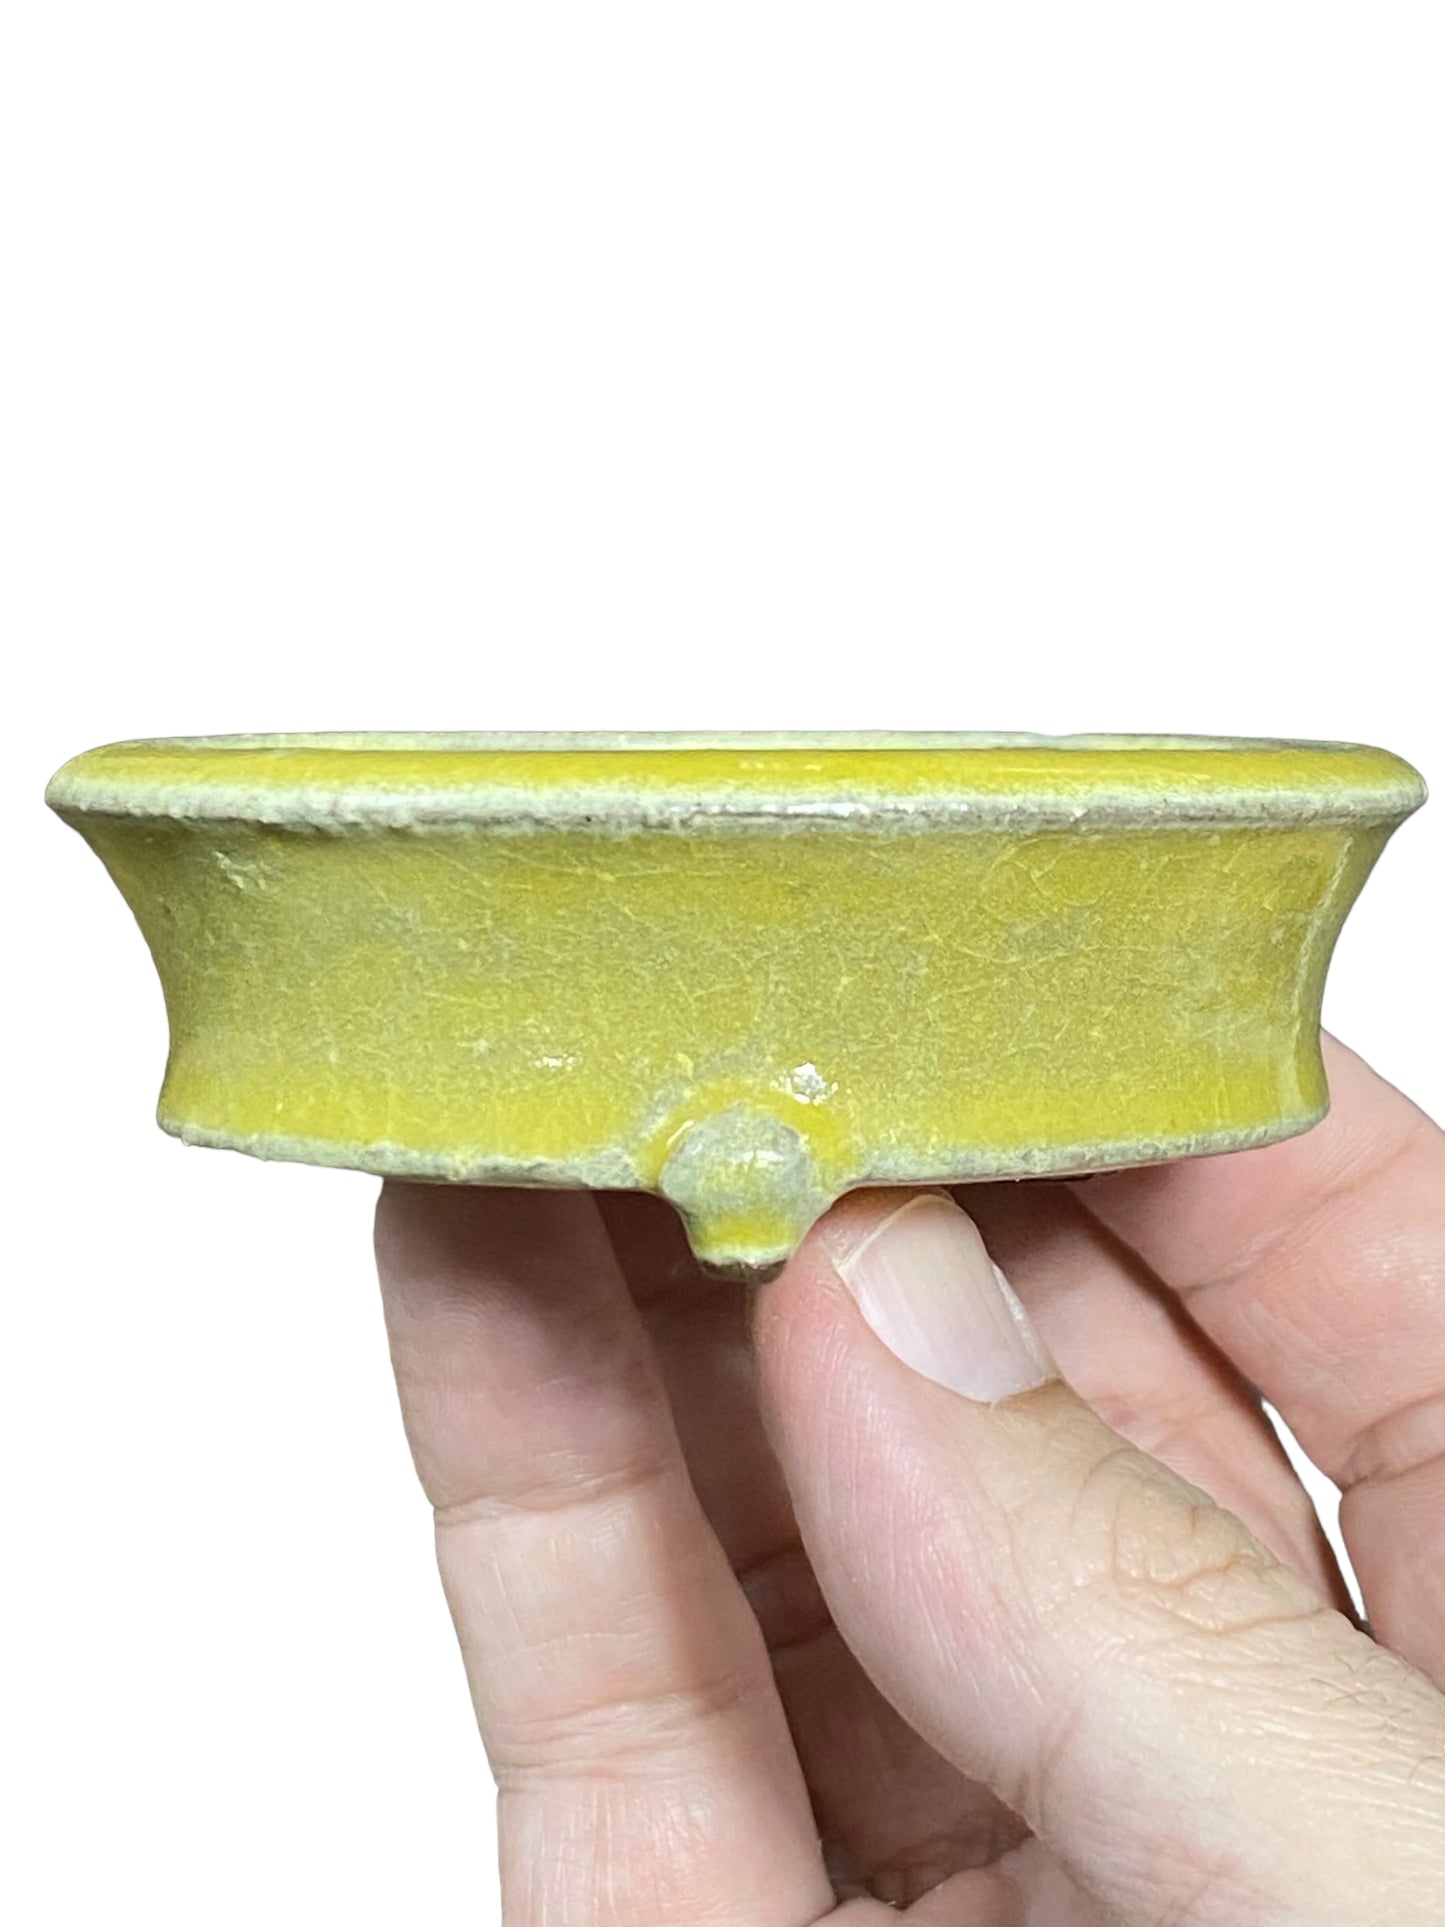 Eimei - Older Yellow Crackle Glazed Footed Round Bonsai Pot